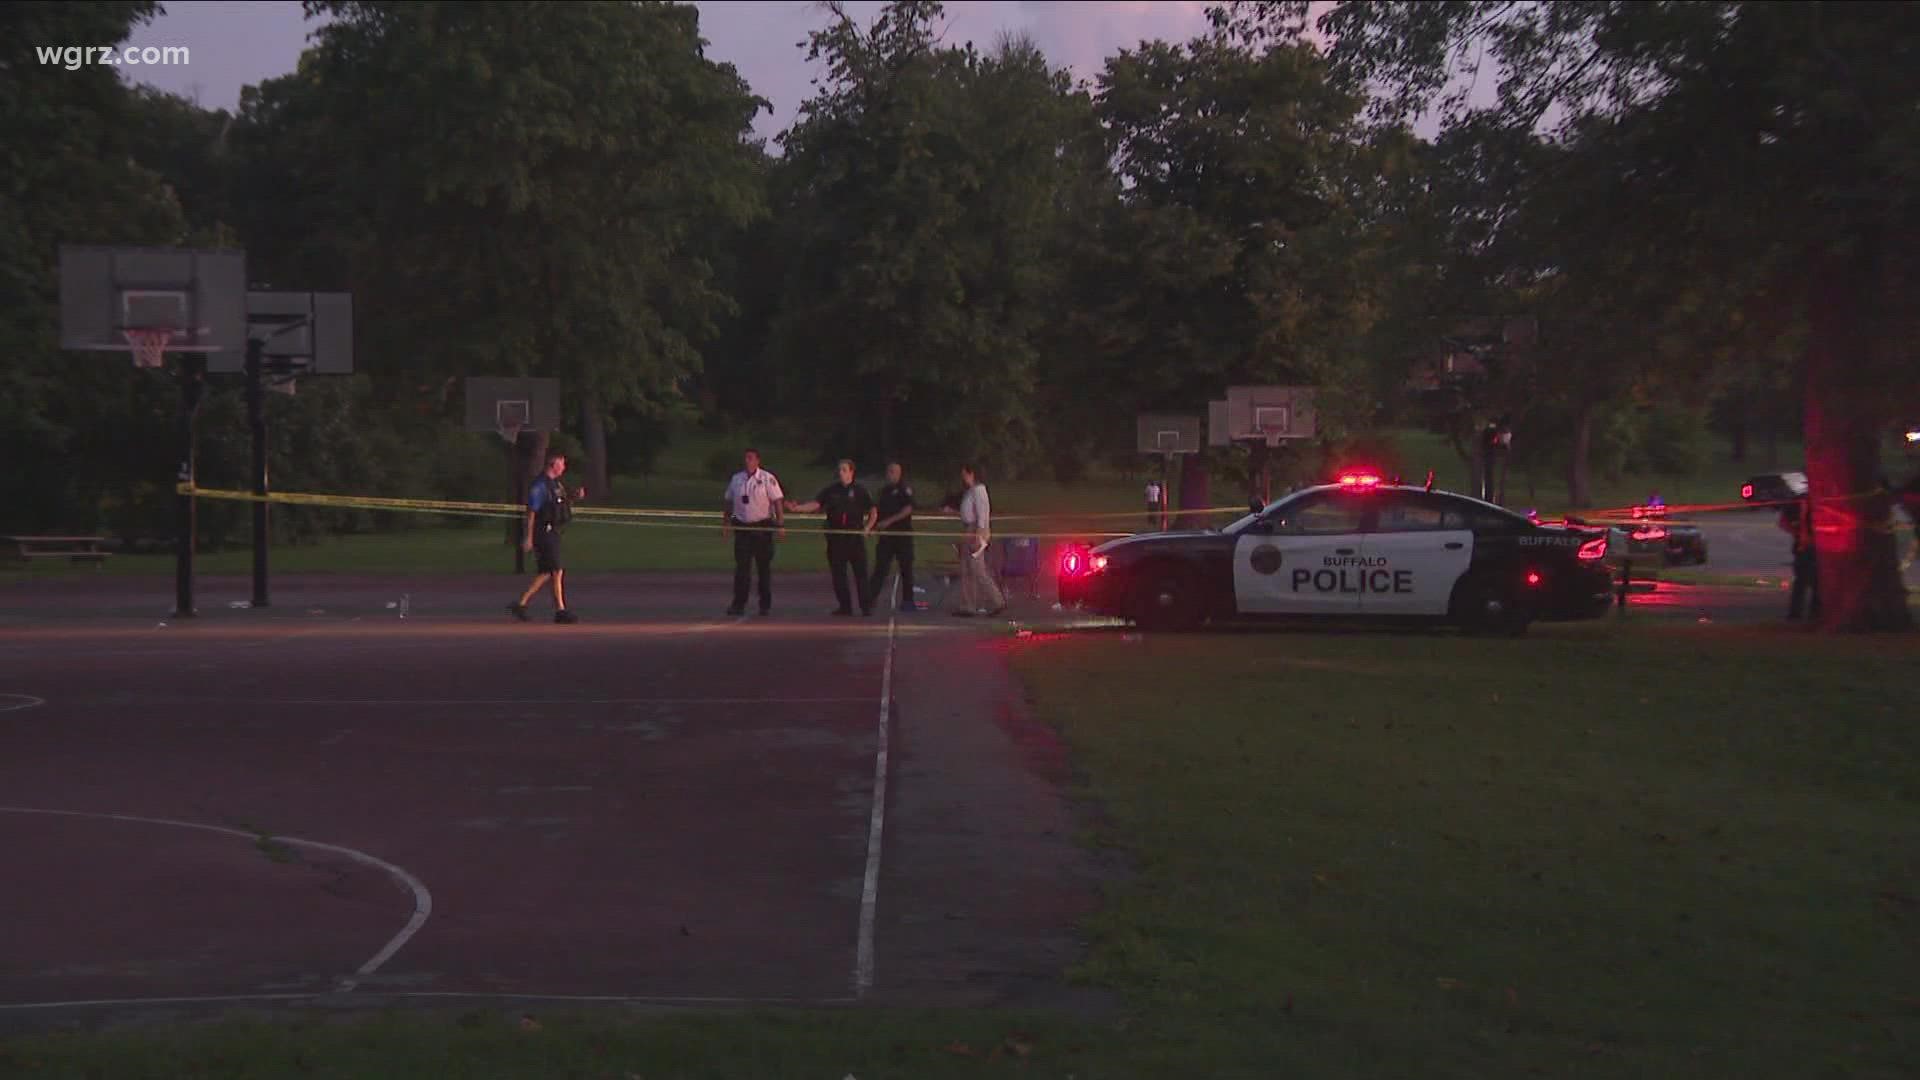 Buffalo police say a man in his mid-20's was shot and killed near a basketball court area on Parkside Avenue.